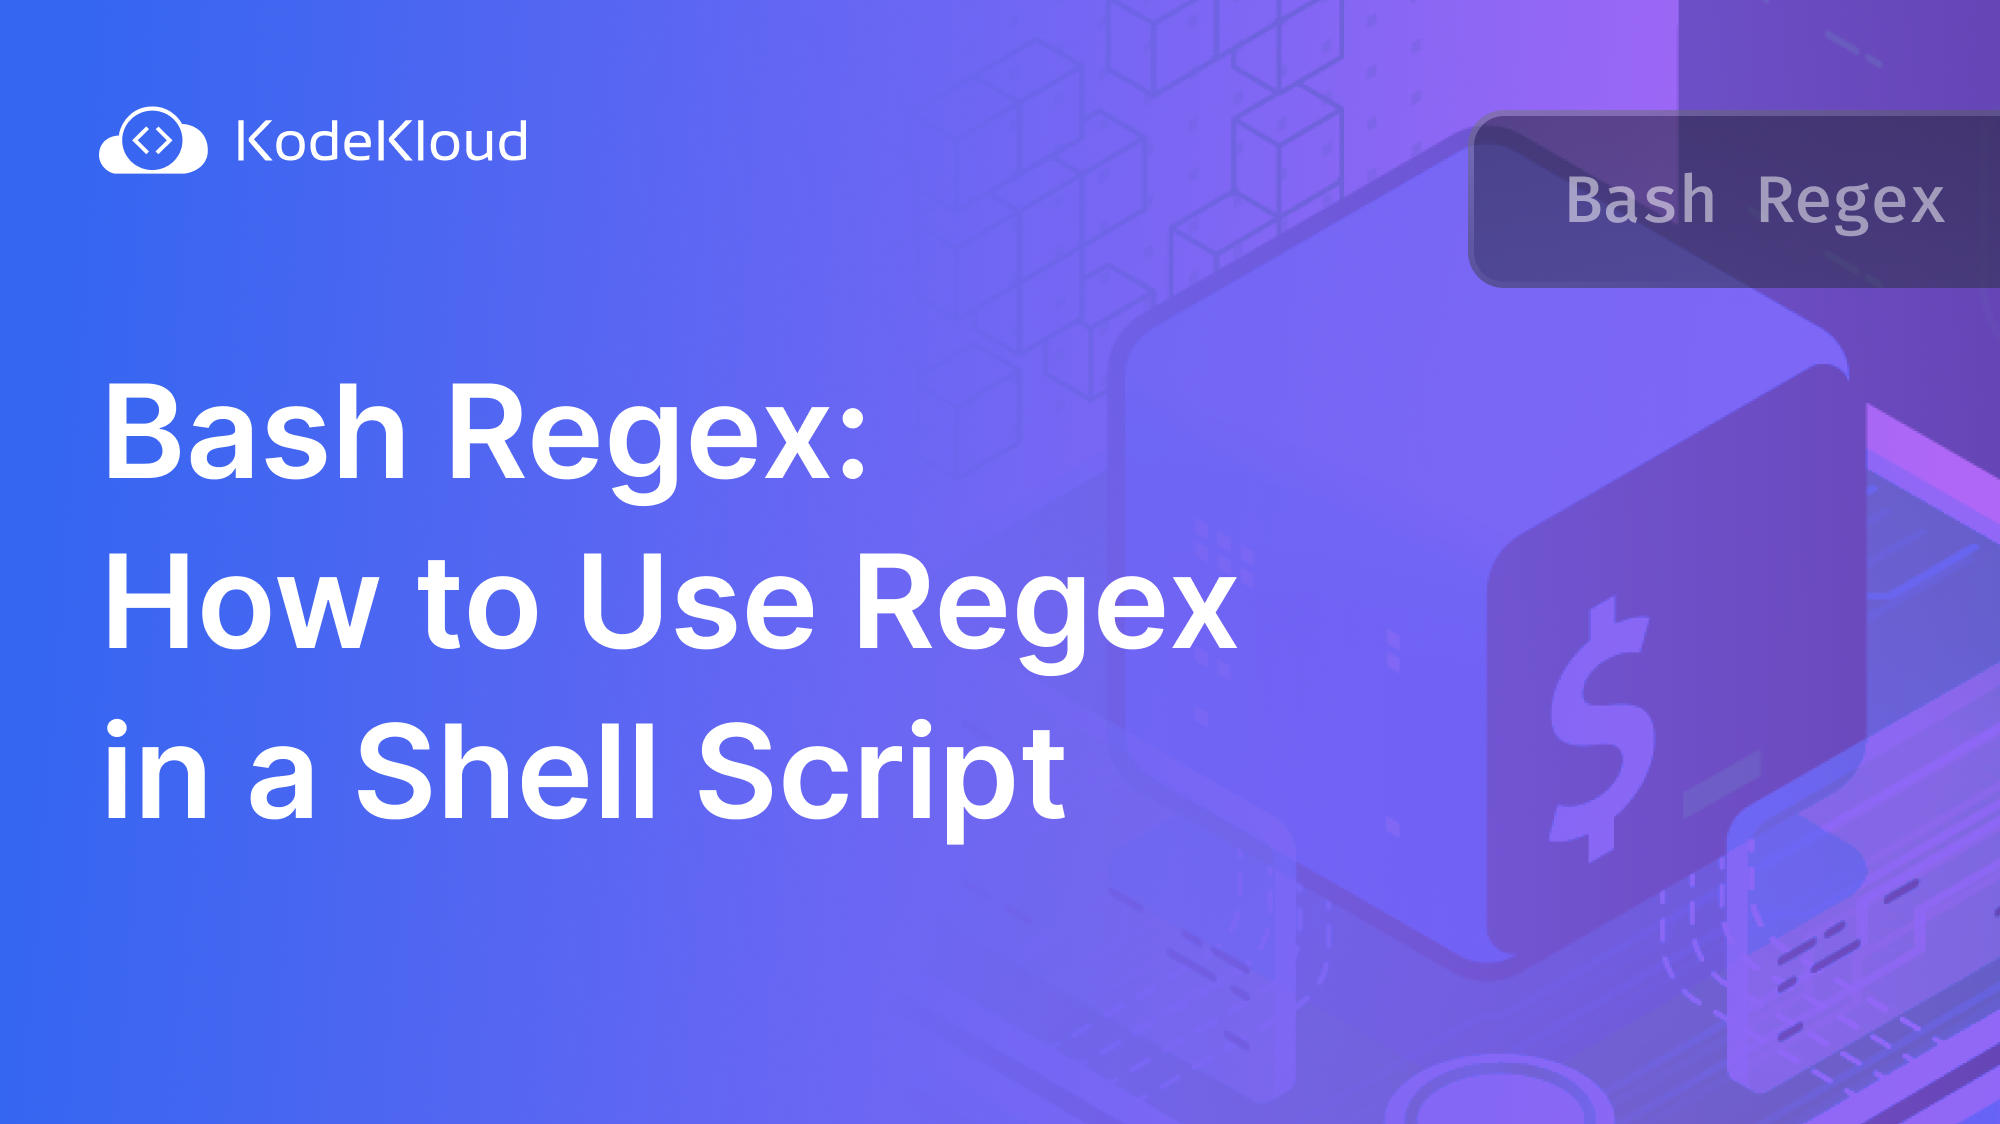 Bash Regex: How to Use Regex in a Shell Script